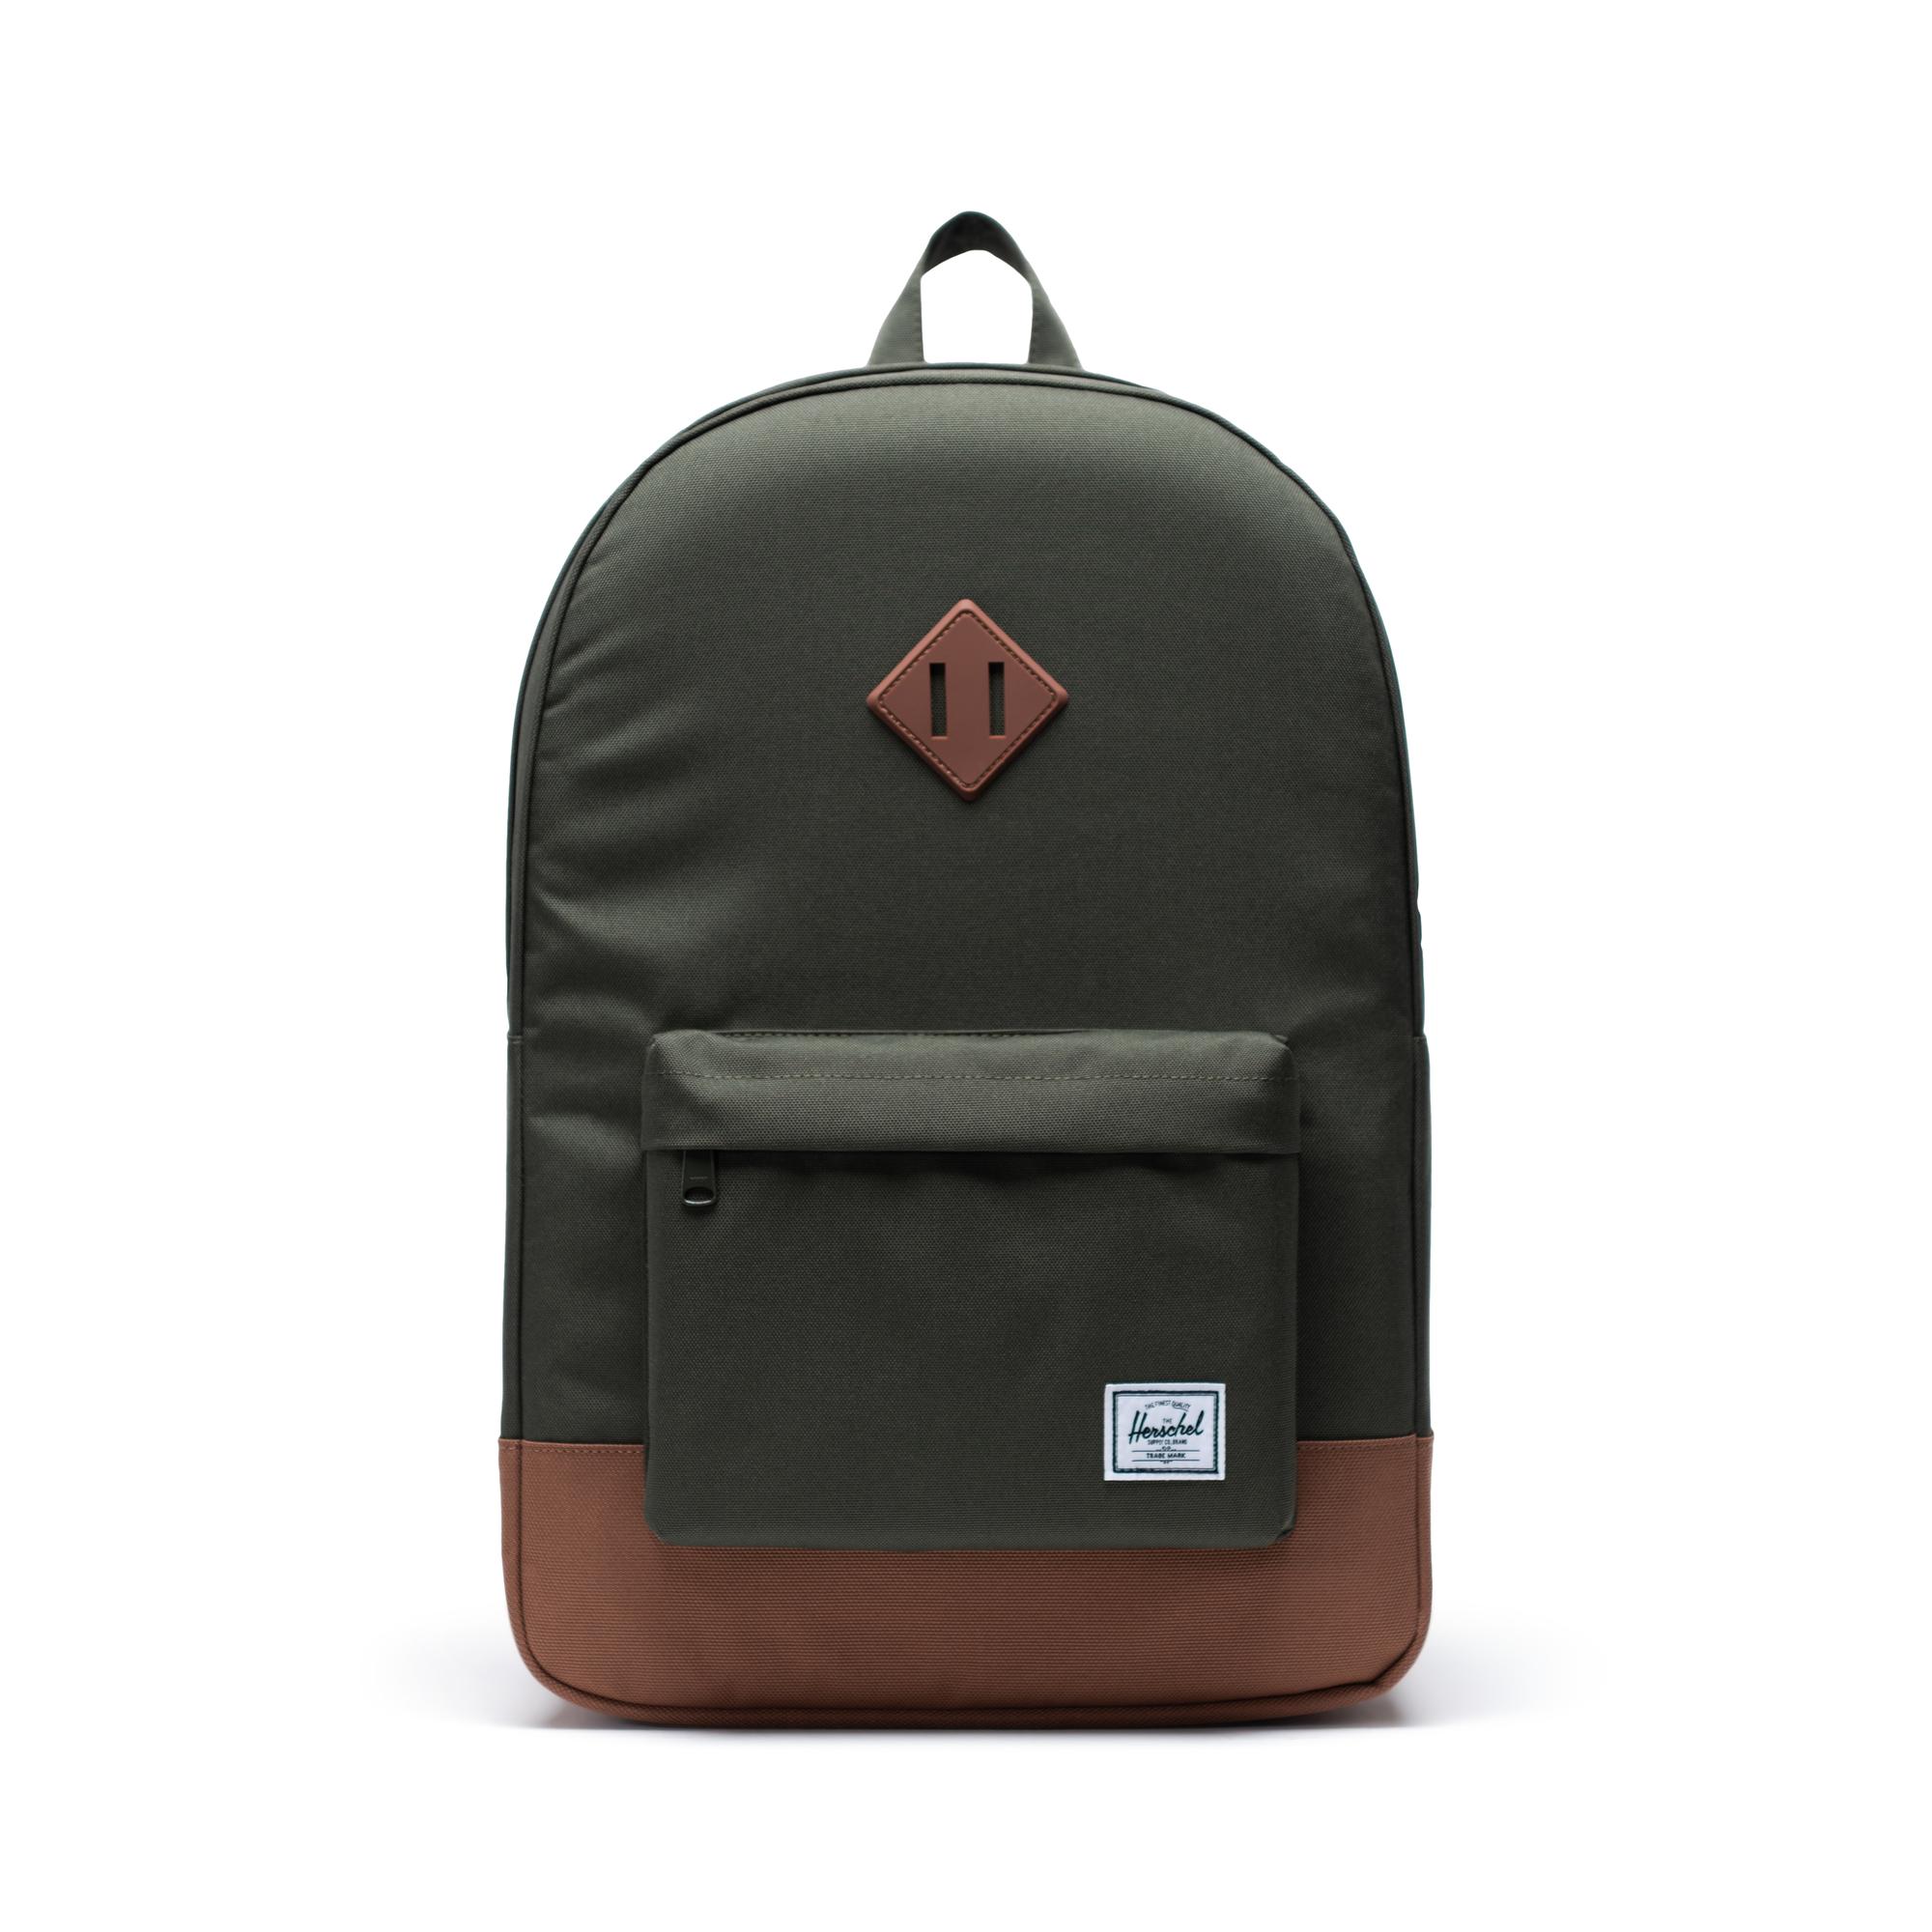 Chapter Travel Kit Woven | Herschel Supply Company